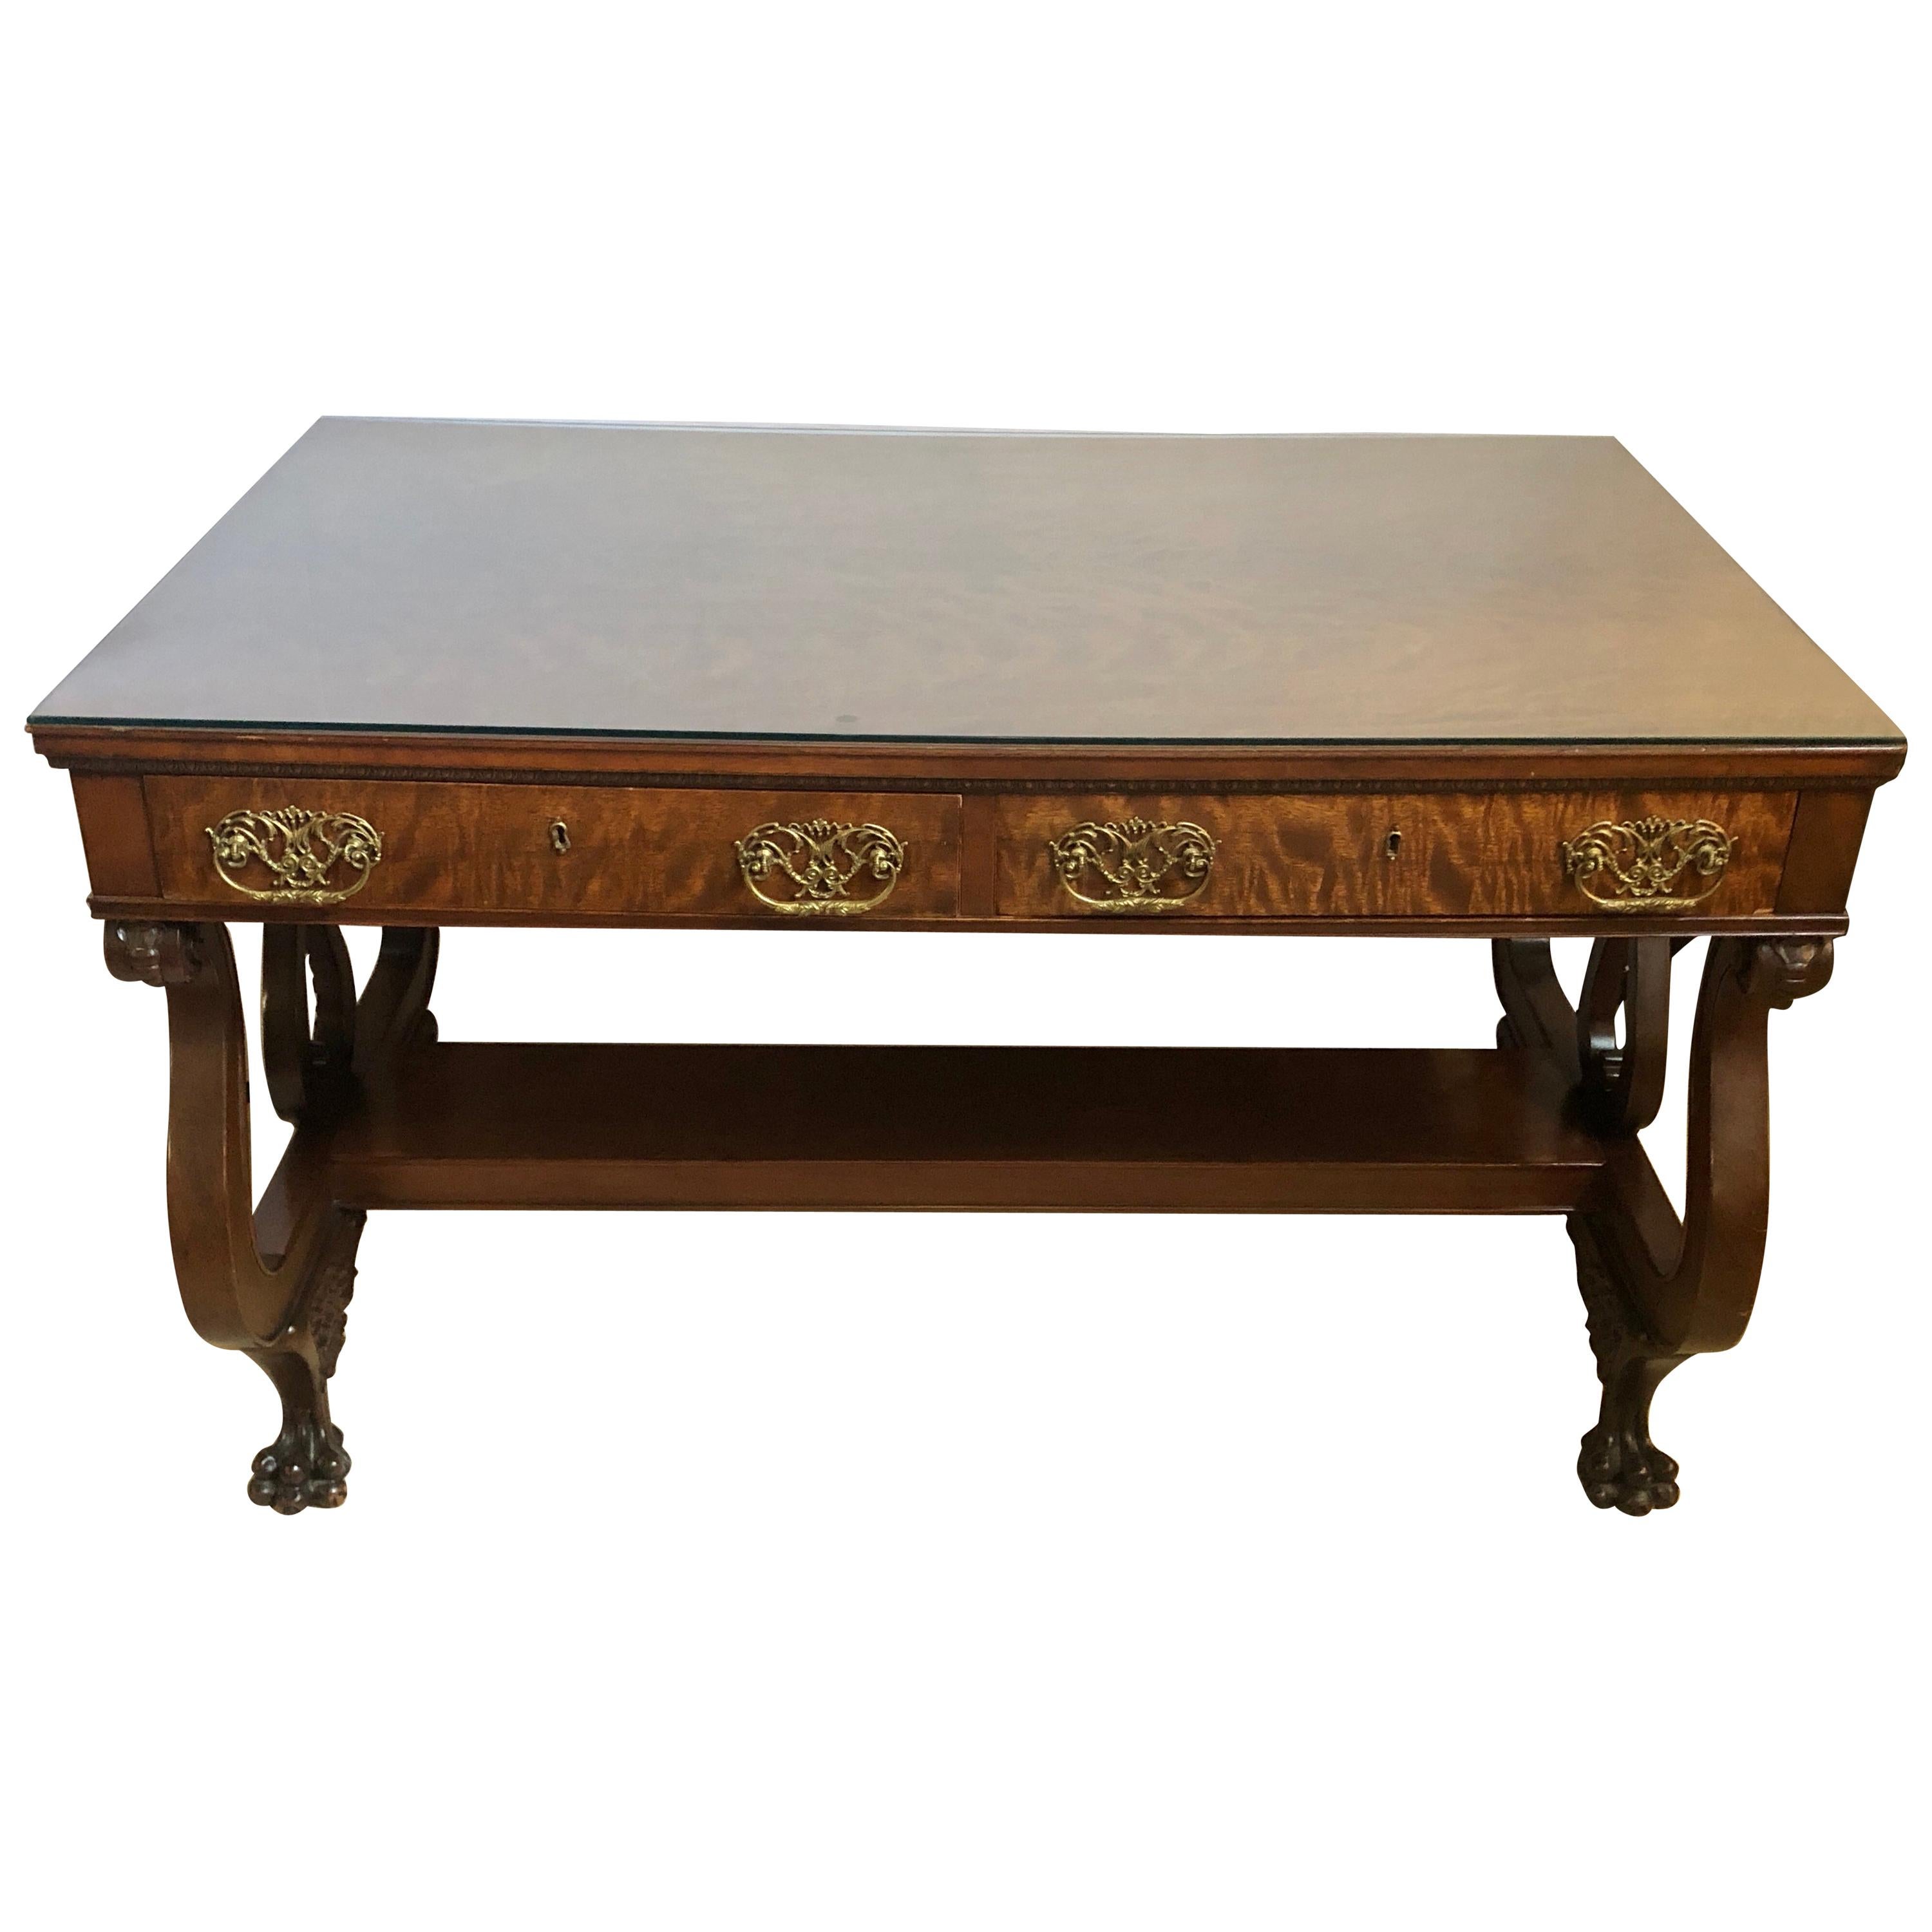 19th or 20th Century Empire Style Faux Partners or Writing Desk Having Claw Feet